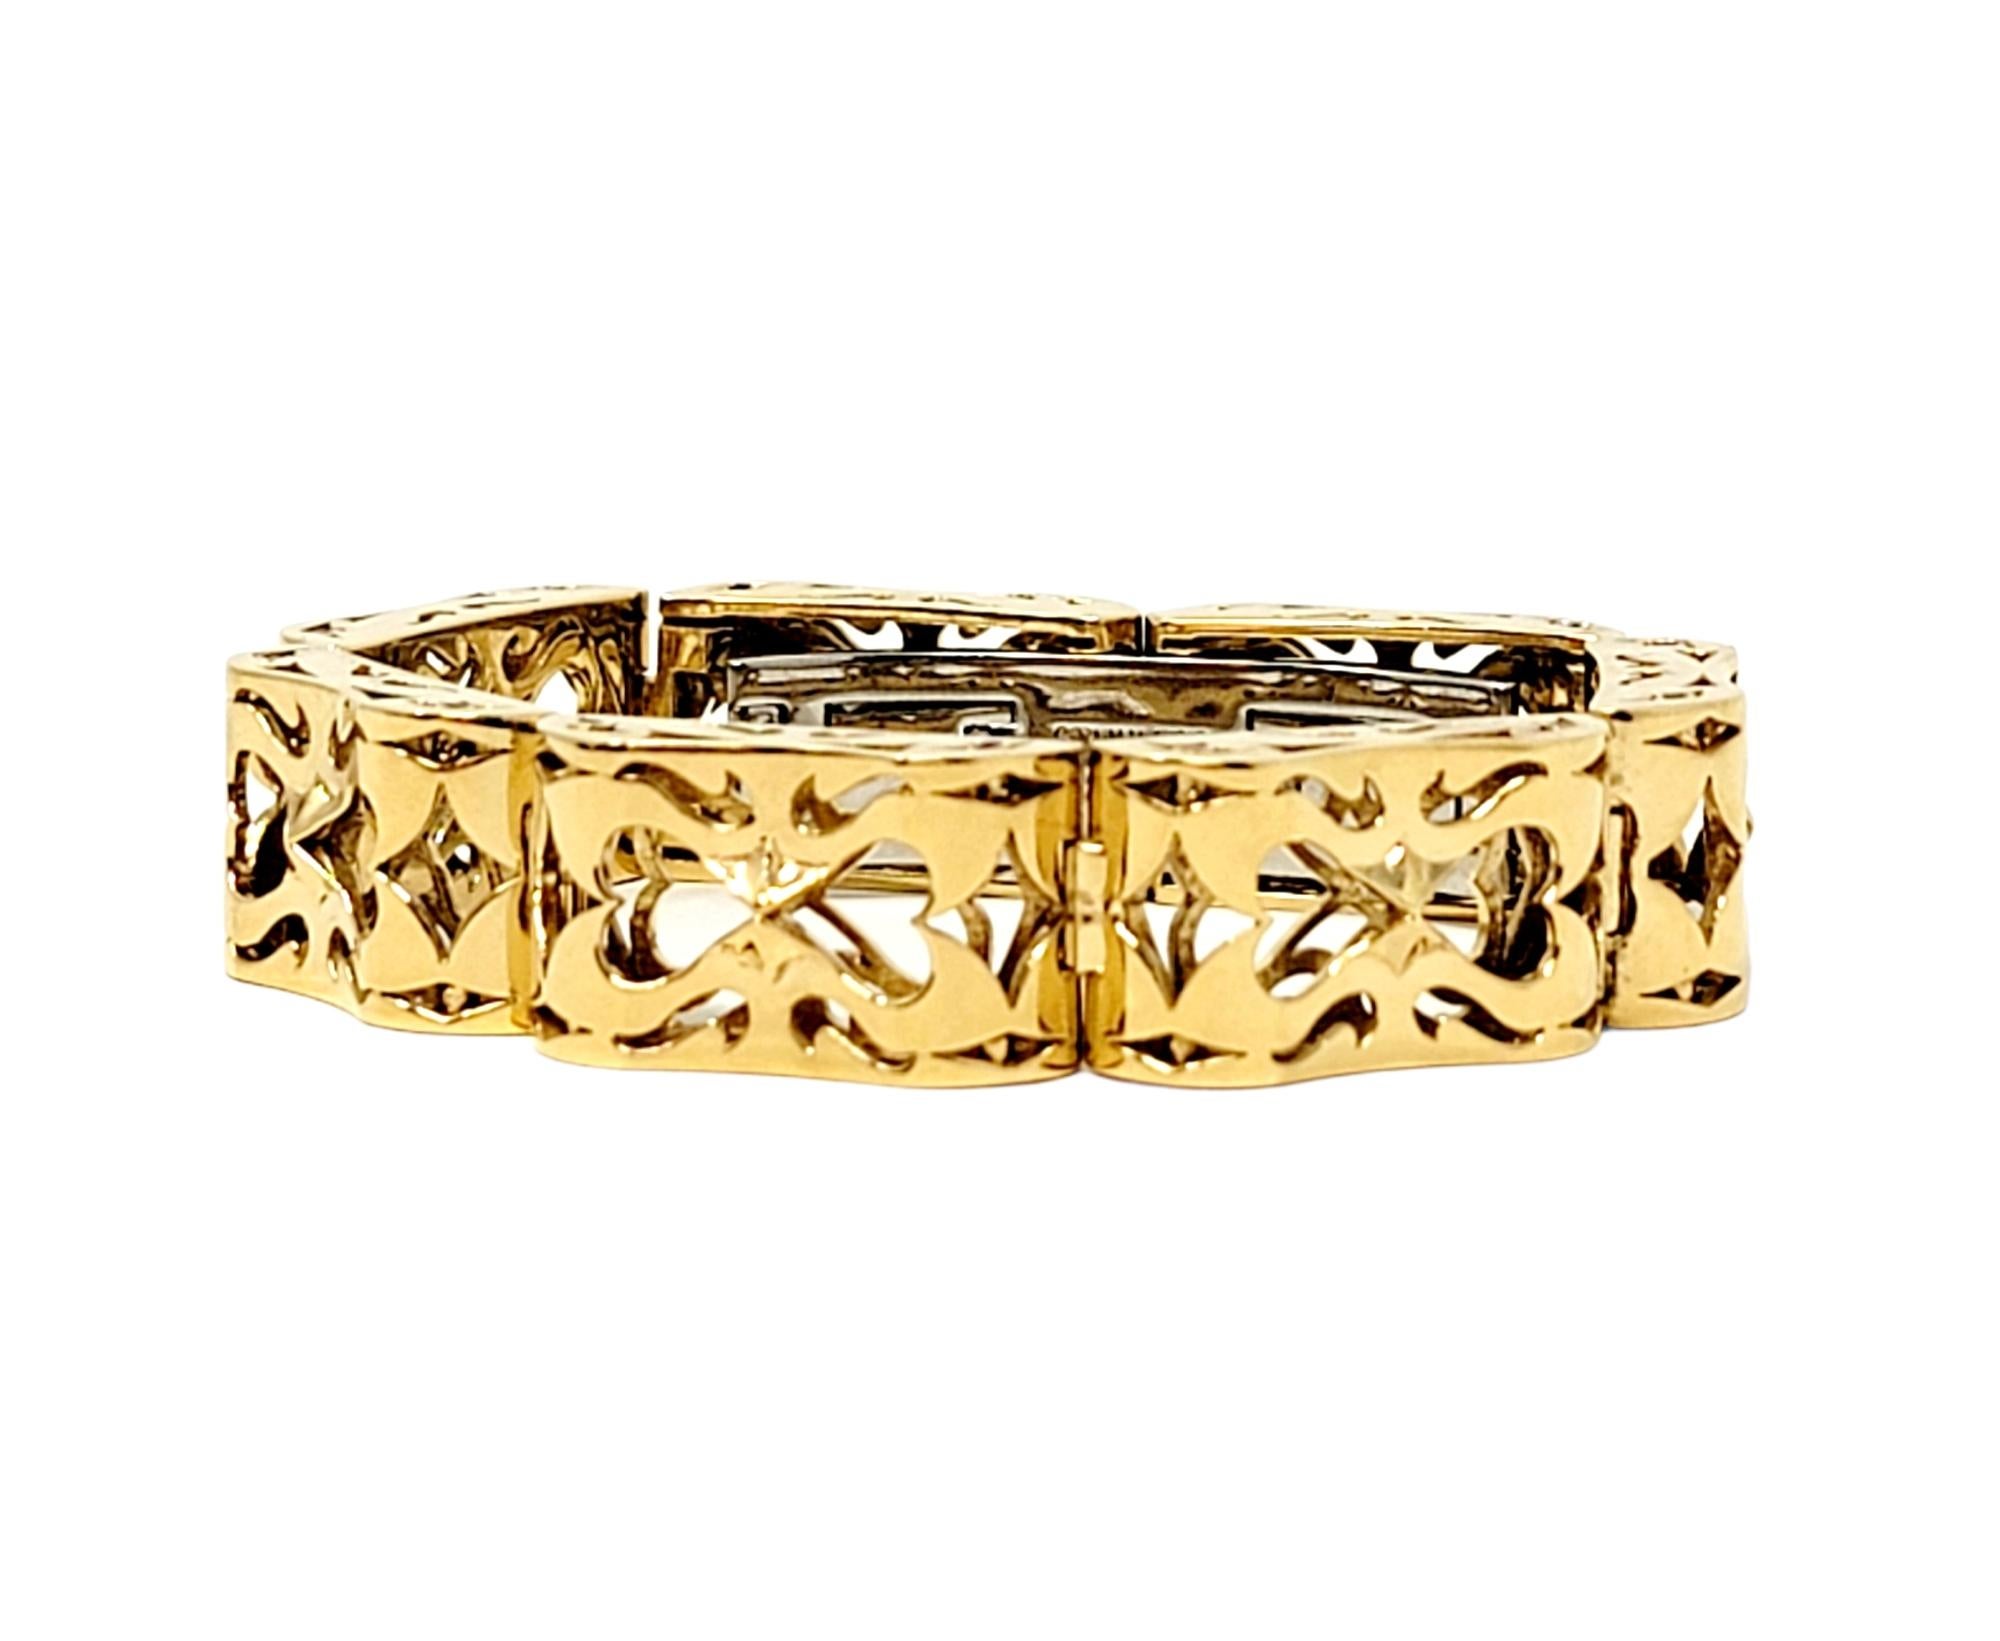 Stunning custom Love bracelet designed by Luz by Houman. Bold and beautiful, this high end designer piece makes a striking statement on the wrist. It features a single row of chunky, wide 18 karat yellow gold links with unique scroll work, as well